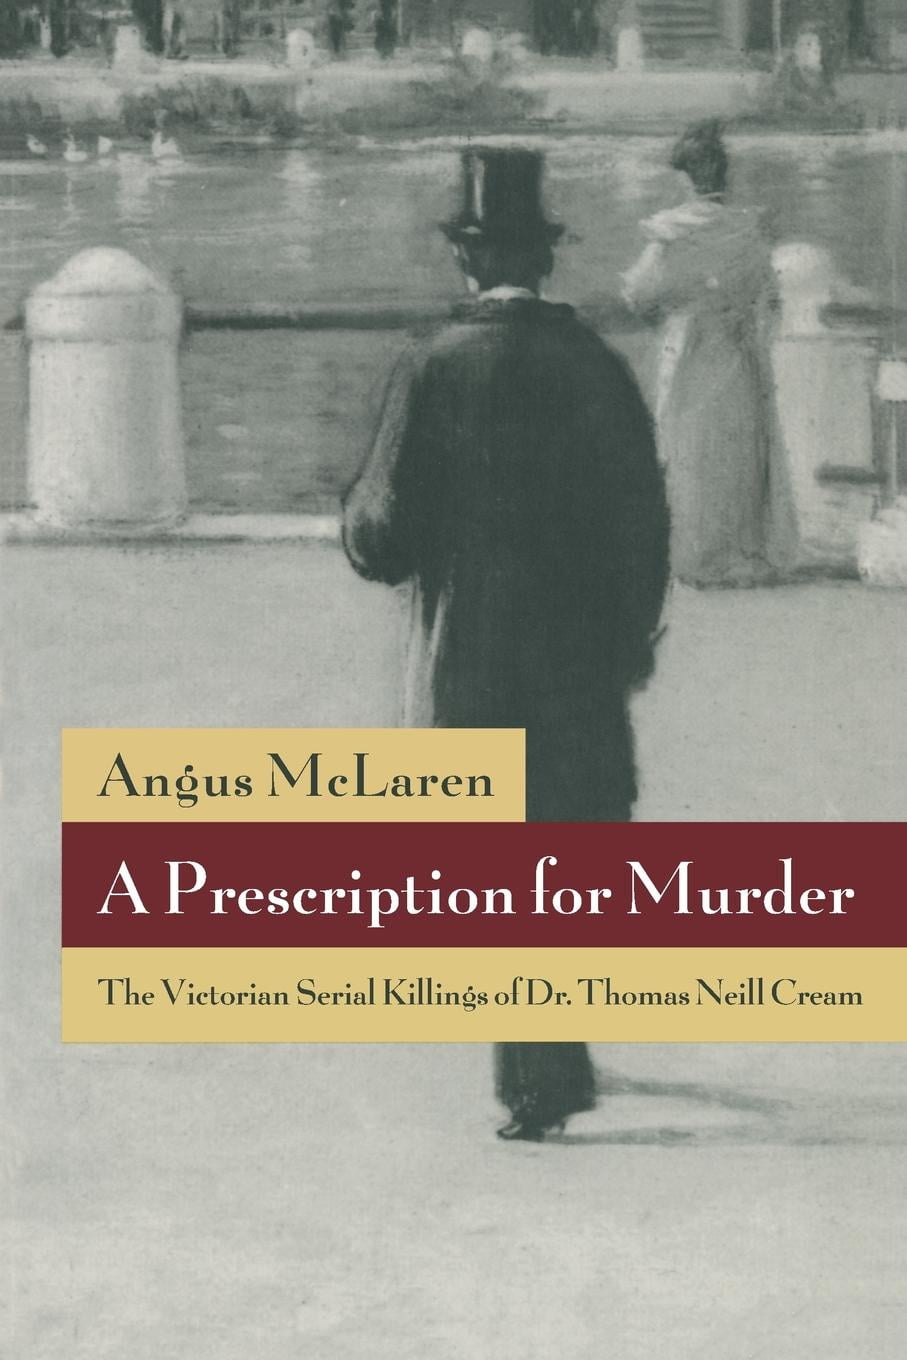 The Chicago Sexuality, History, and Society: A Prescription for Murder ...